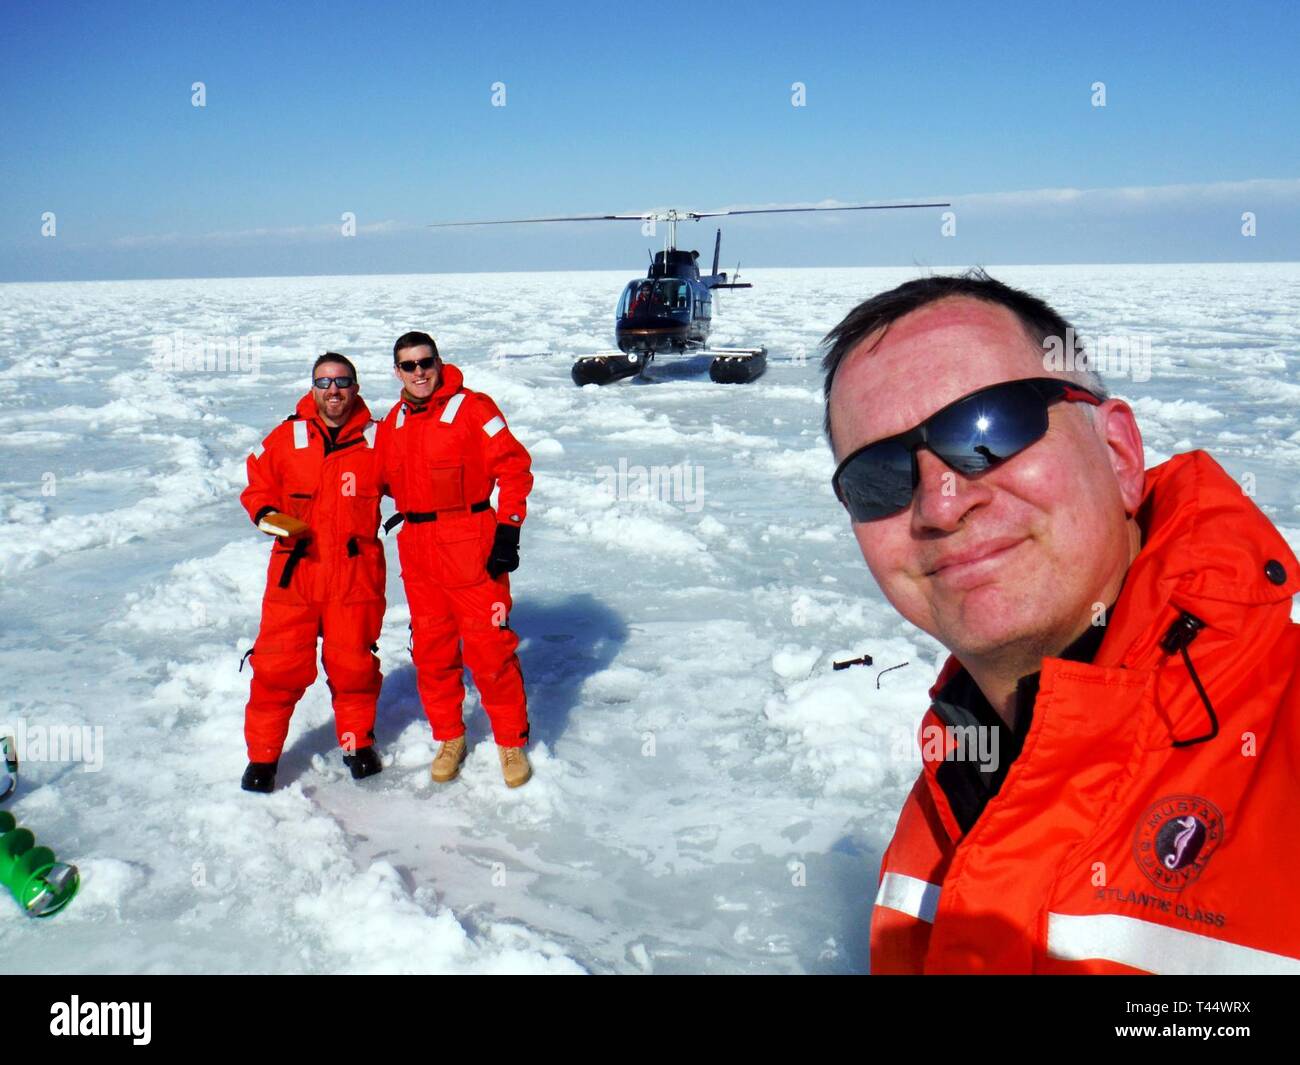 U.S. Army Corps of Engineers Buffalo District team members Lt. Col. Jason A. Toth and Andrew Armstrong, Frank Seglenieks from Environment and Climate Change Canada, and members of the International Niagara Working Committee conduct a helicopter ice-thickness measurement flight on Lake Erie, Feb. 22, 2019.     Each winter, the INWC conducts two helicopter ice-thickness measurement flights and two survey flights of the Eastern Basin of Lake Erie to assess ice conditions and determine when the ice boom can be removed from the mouth of the Niagara River. Stock Photo